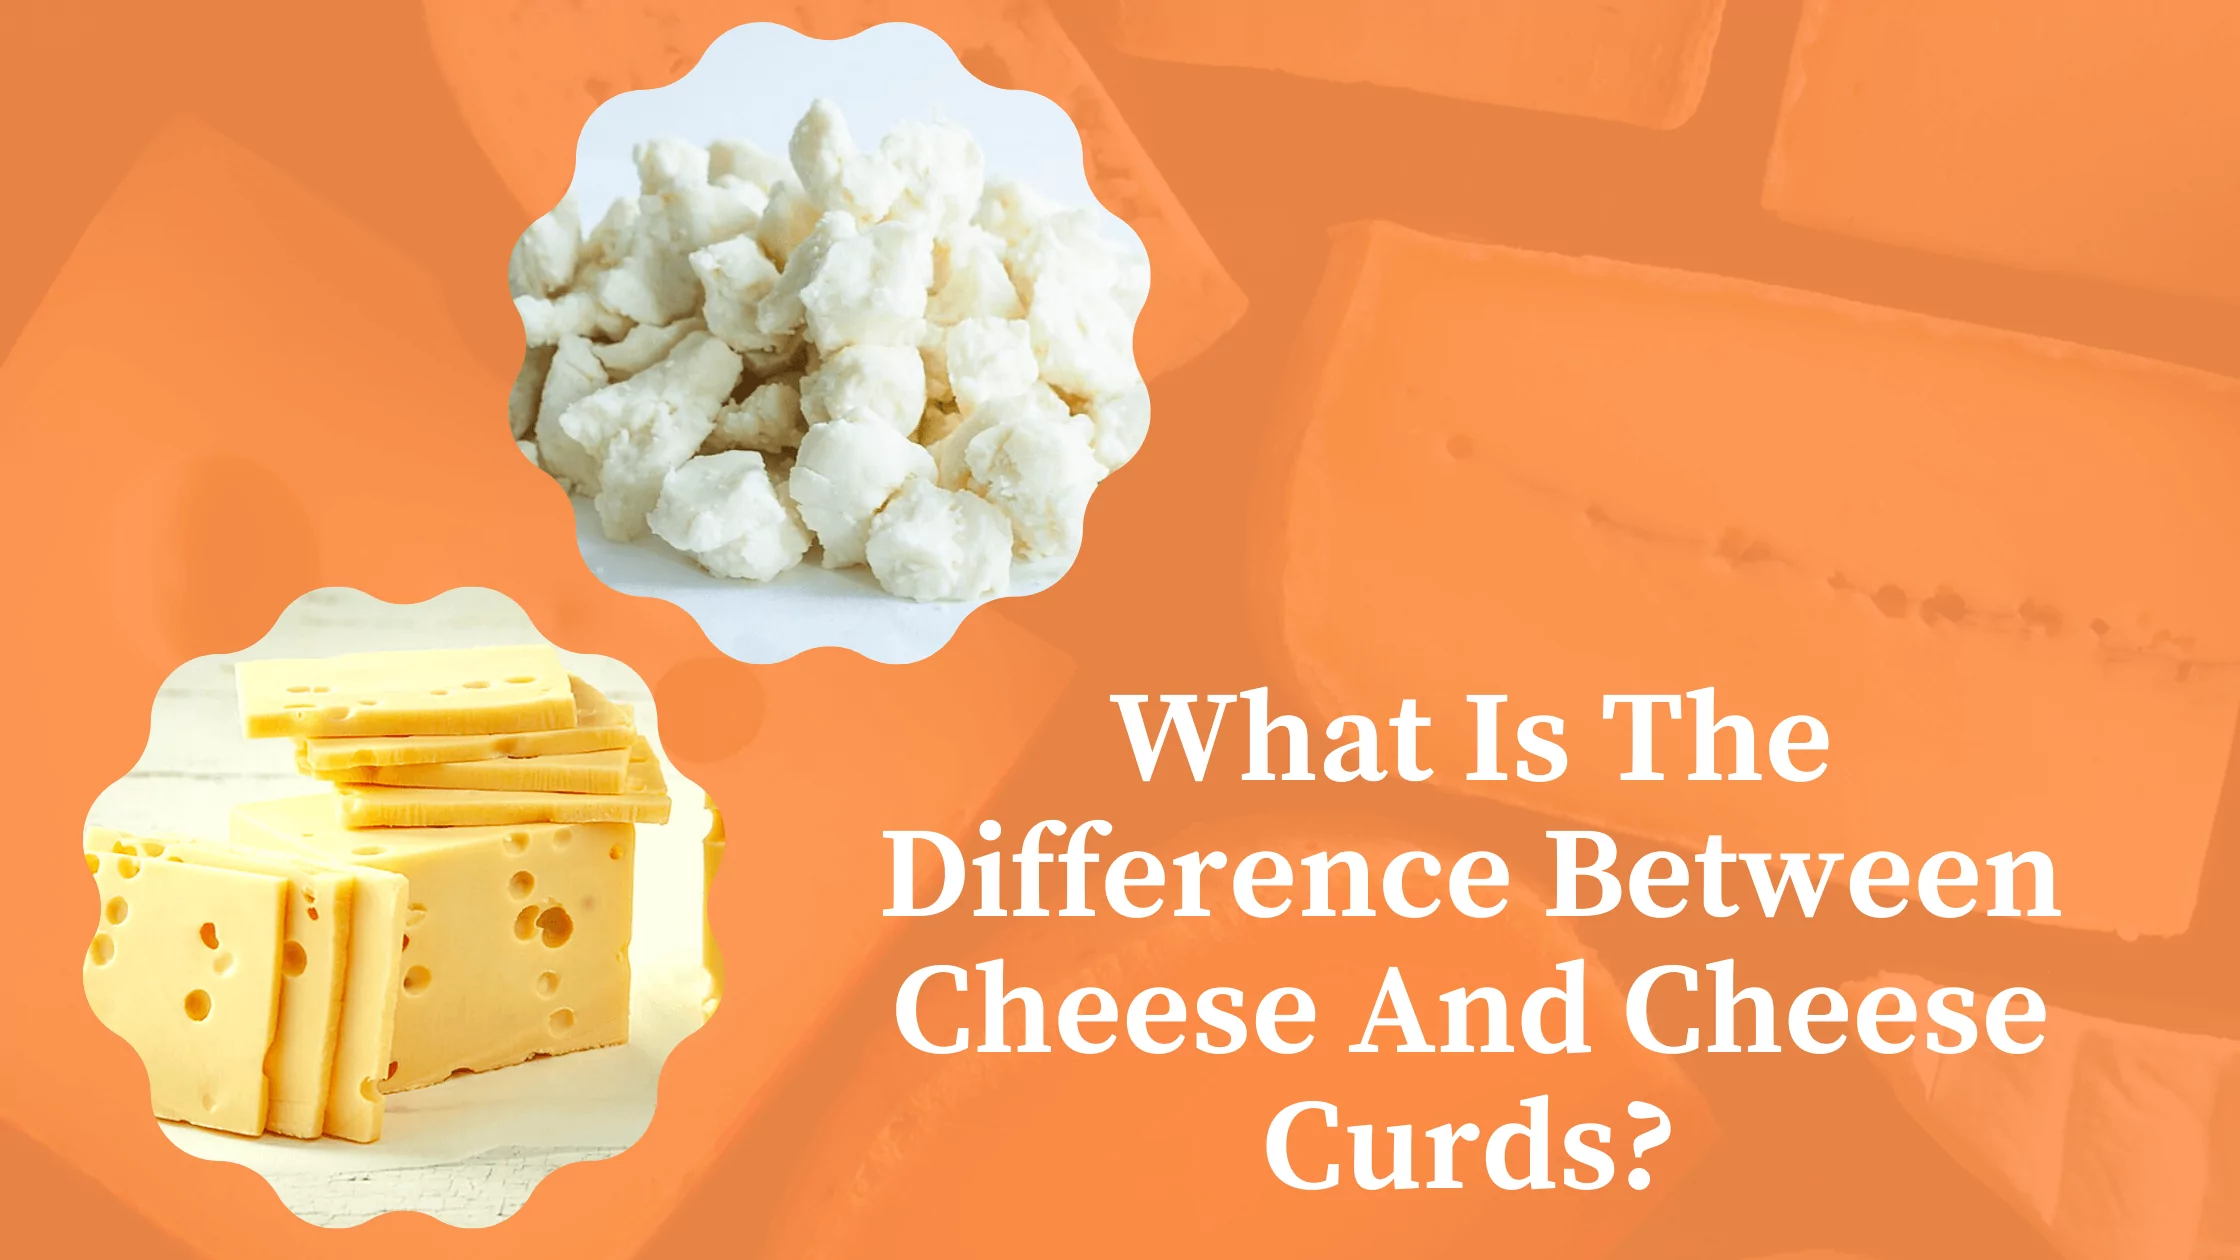 What Is The Difference Between Cheese And Cheese Curds